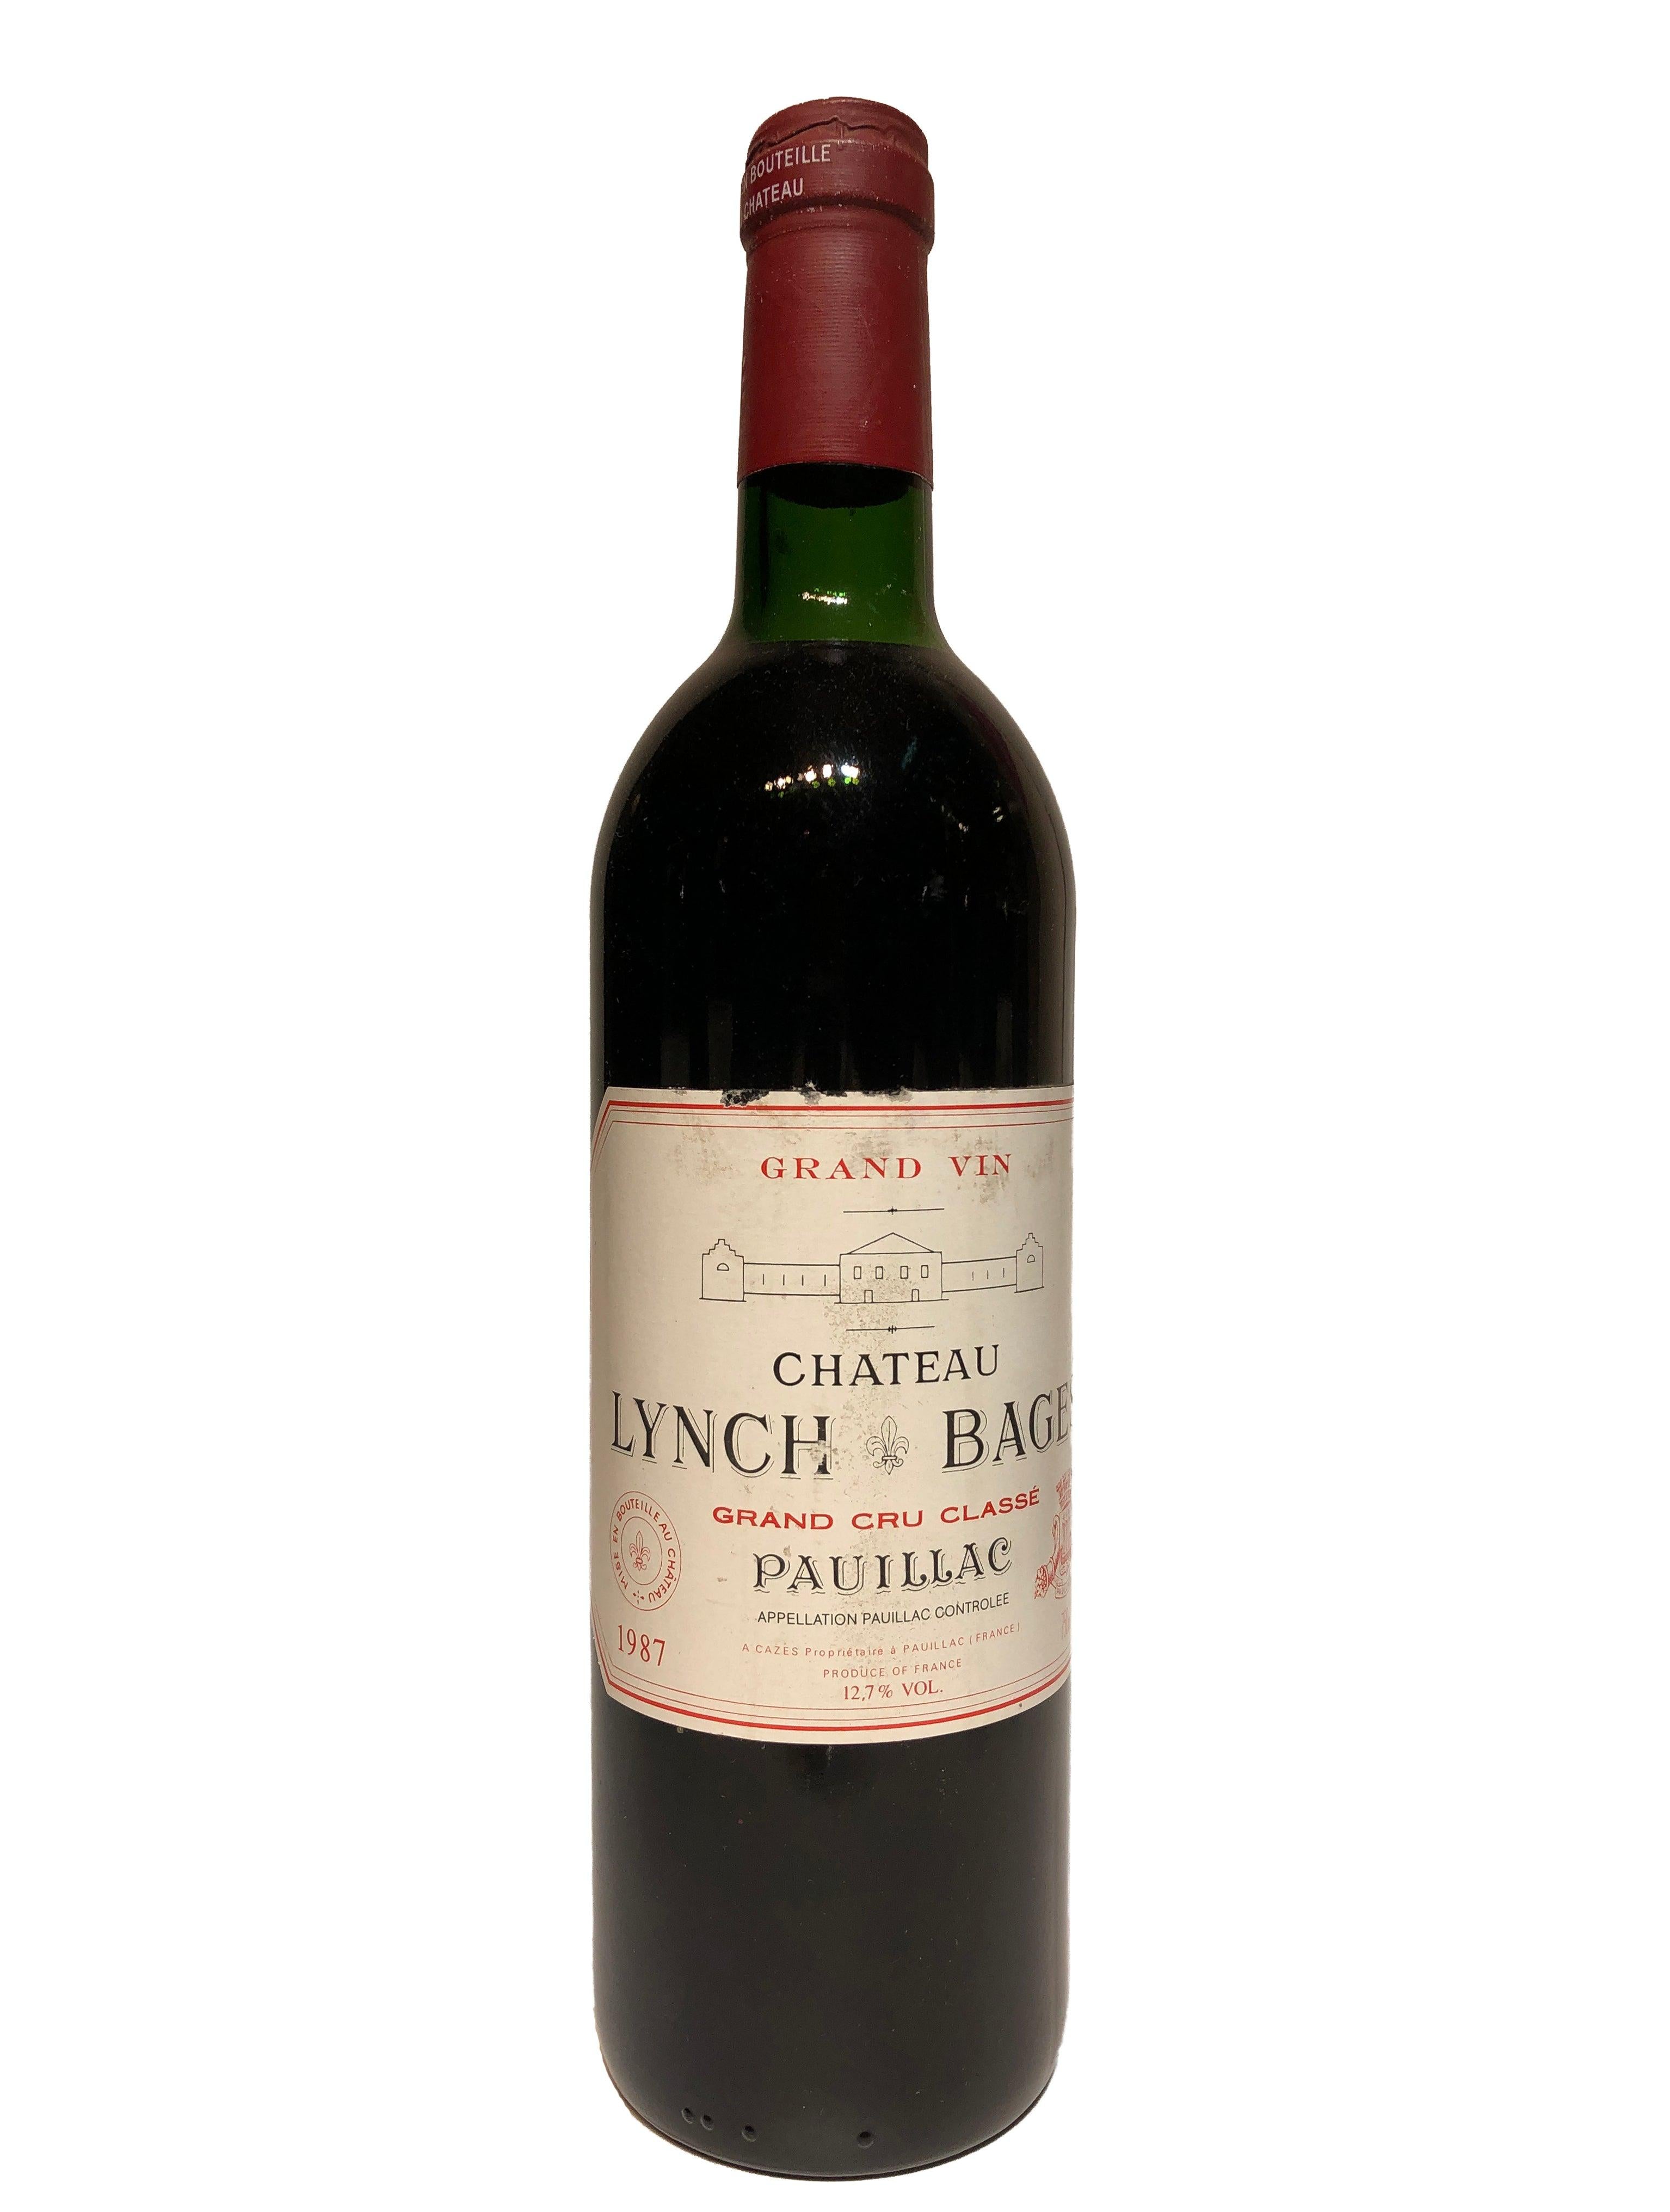 Château Lynch Bages 1987 - Double S Wine 